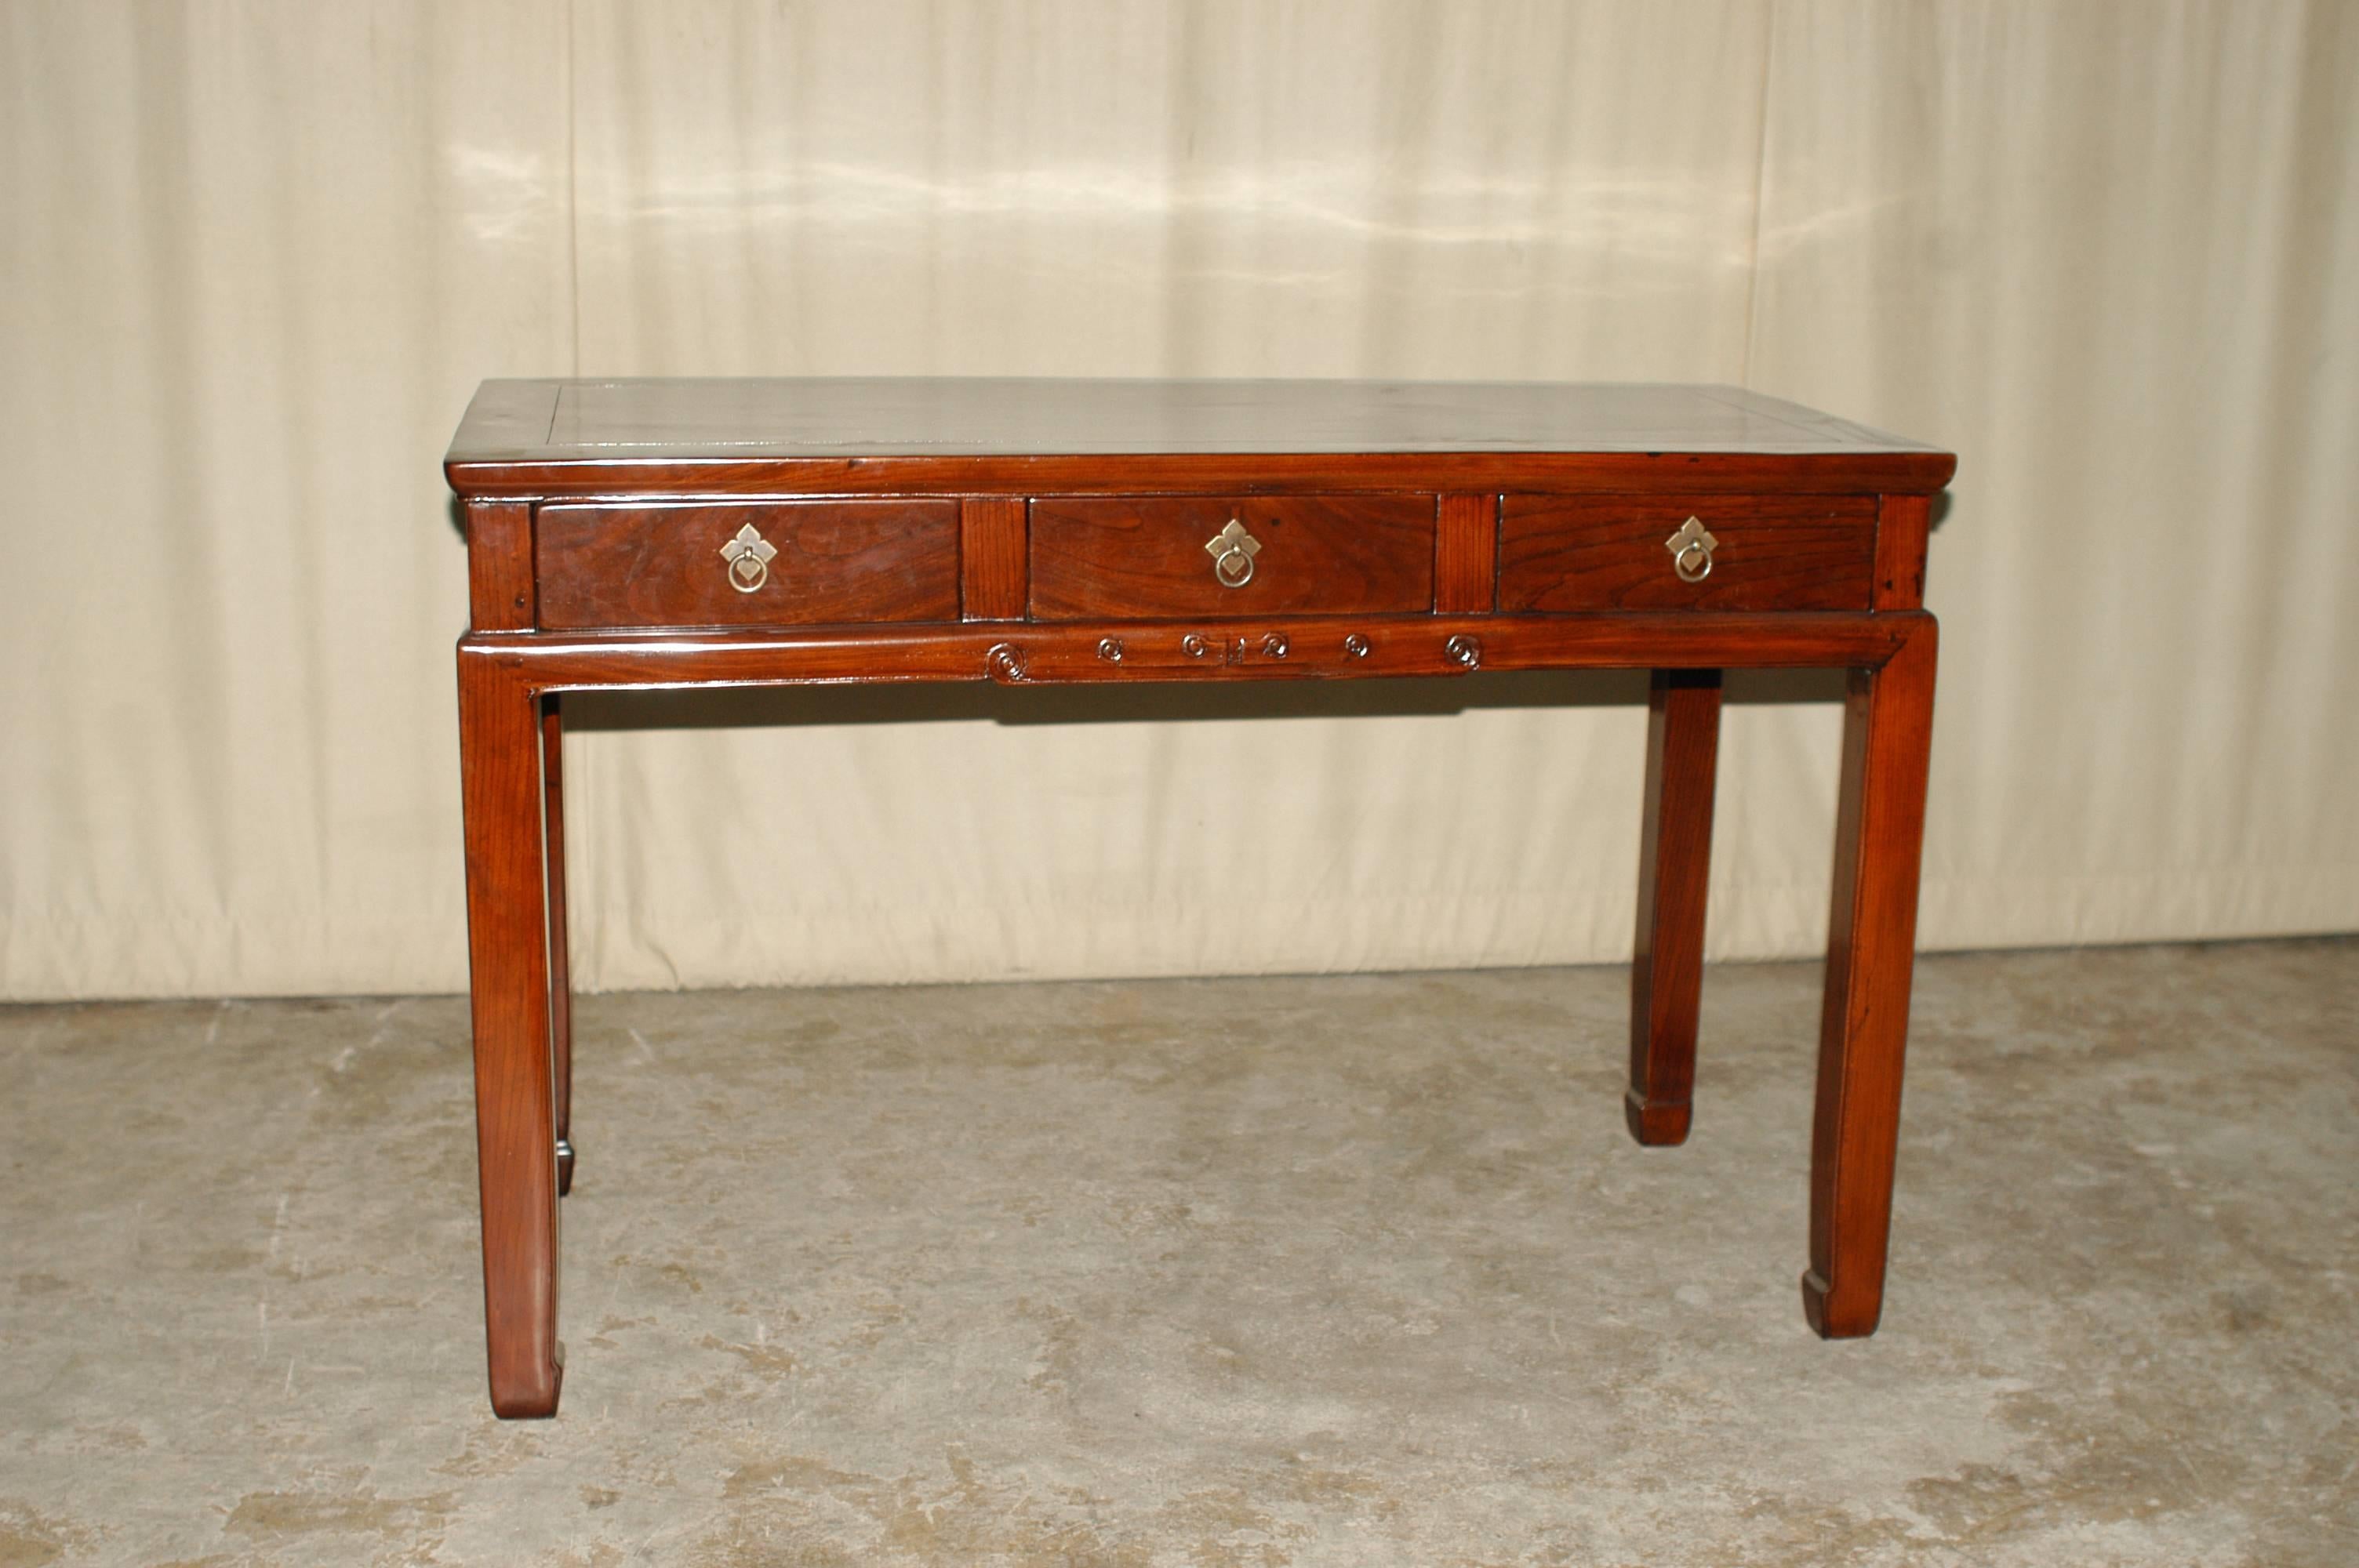 Fine Jumu table or desk with three drawers, brass ring pulls, beautiful form and lines.  We carry fine quality furniture with elegant finished and has been appeared many times in 